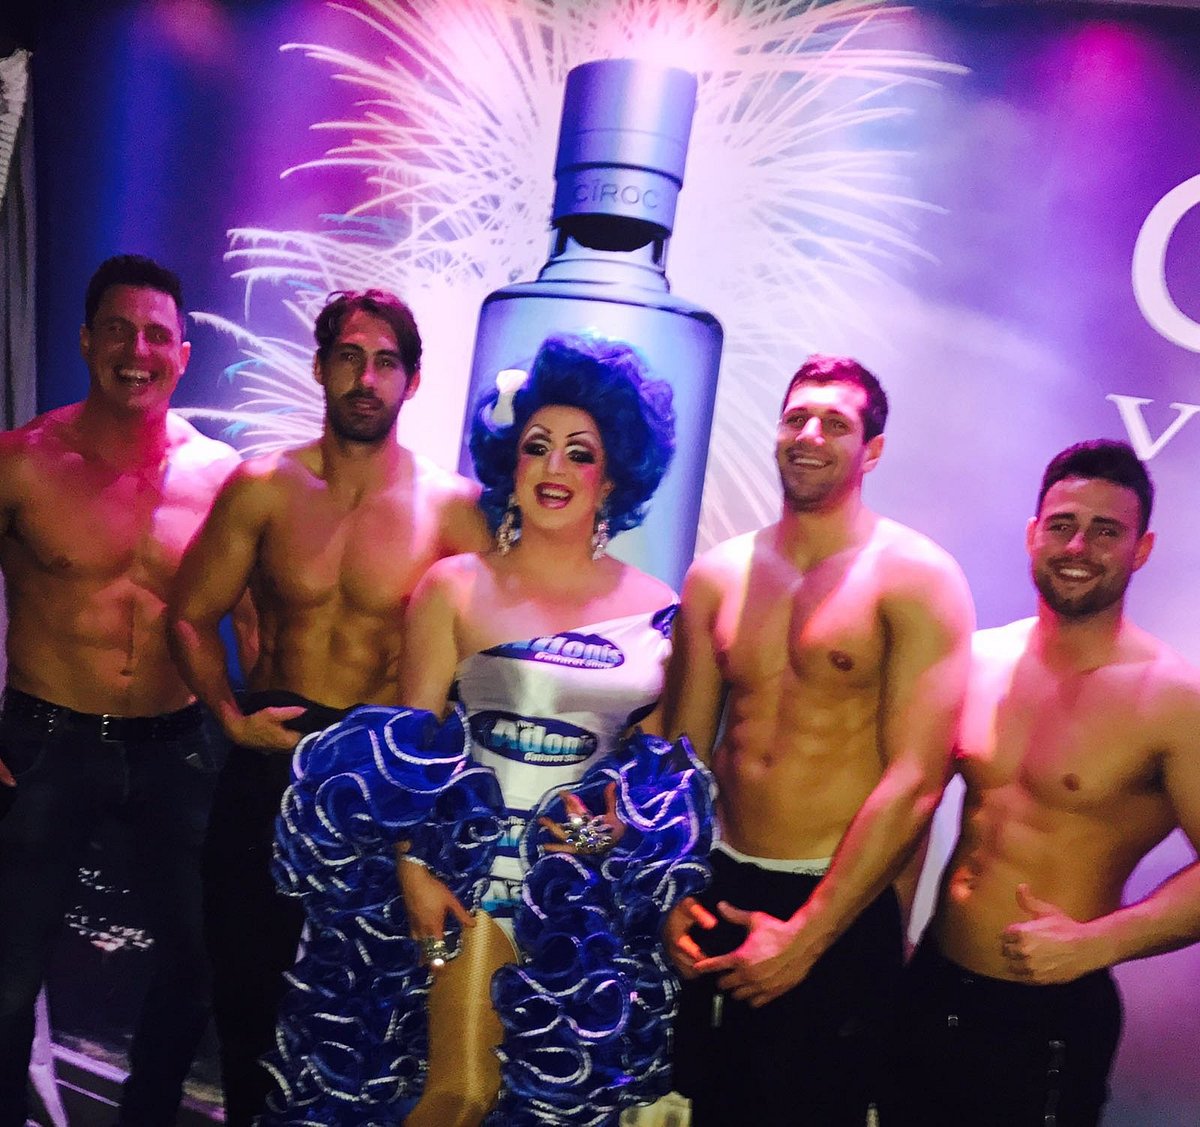 Adonis Cabaret - The Brighton Show - All You Need to Know BEFORE You Go